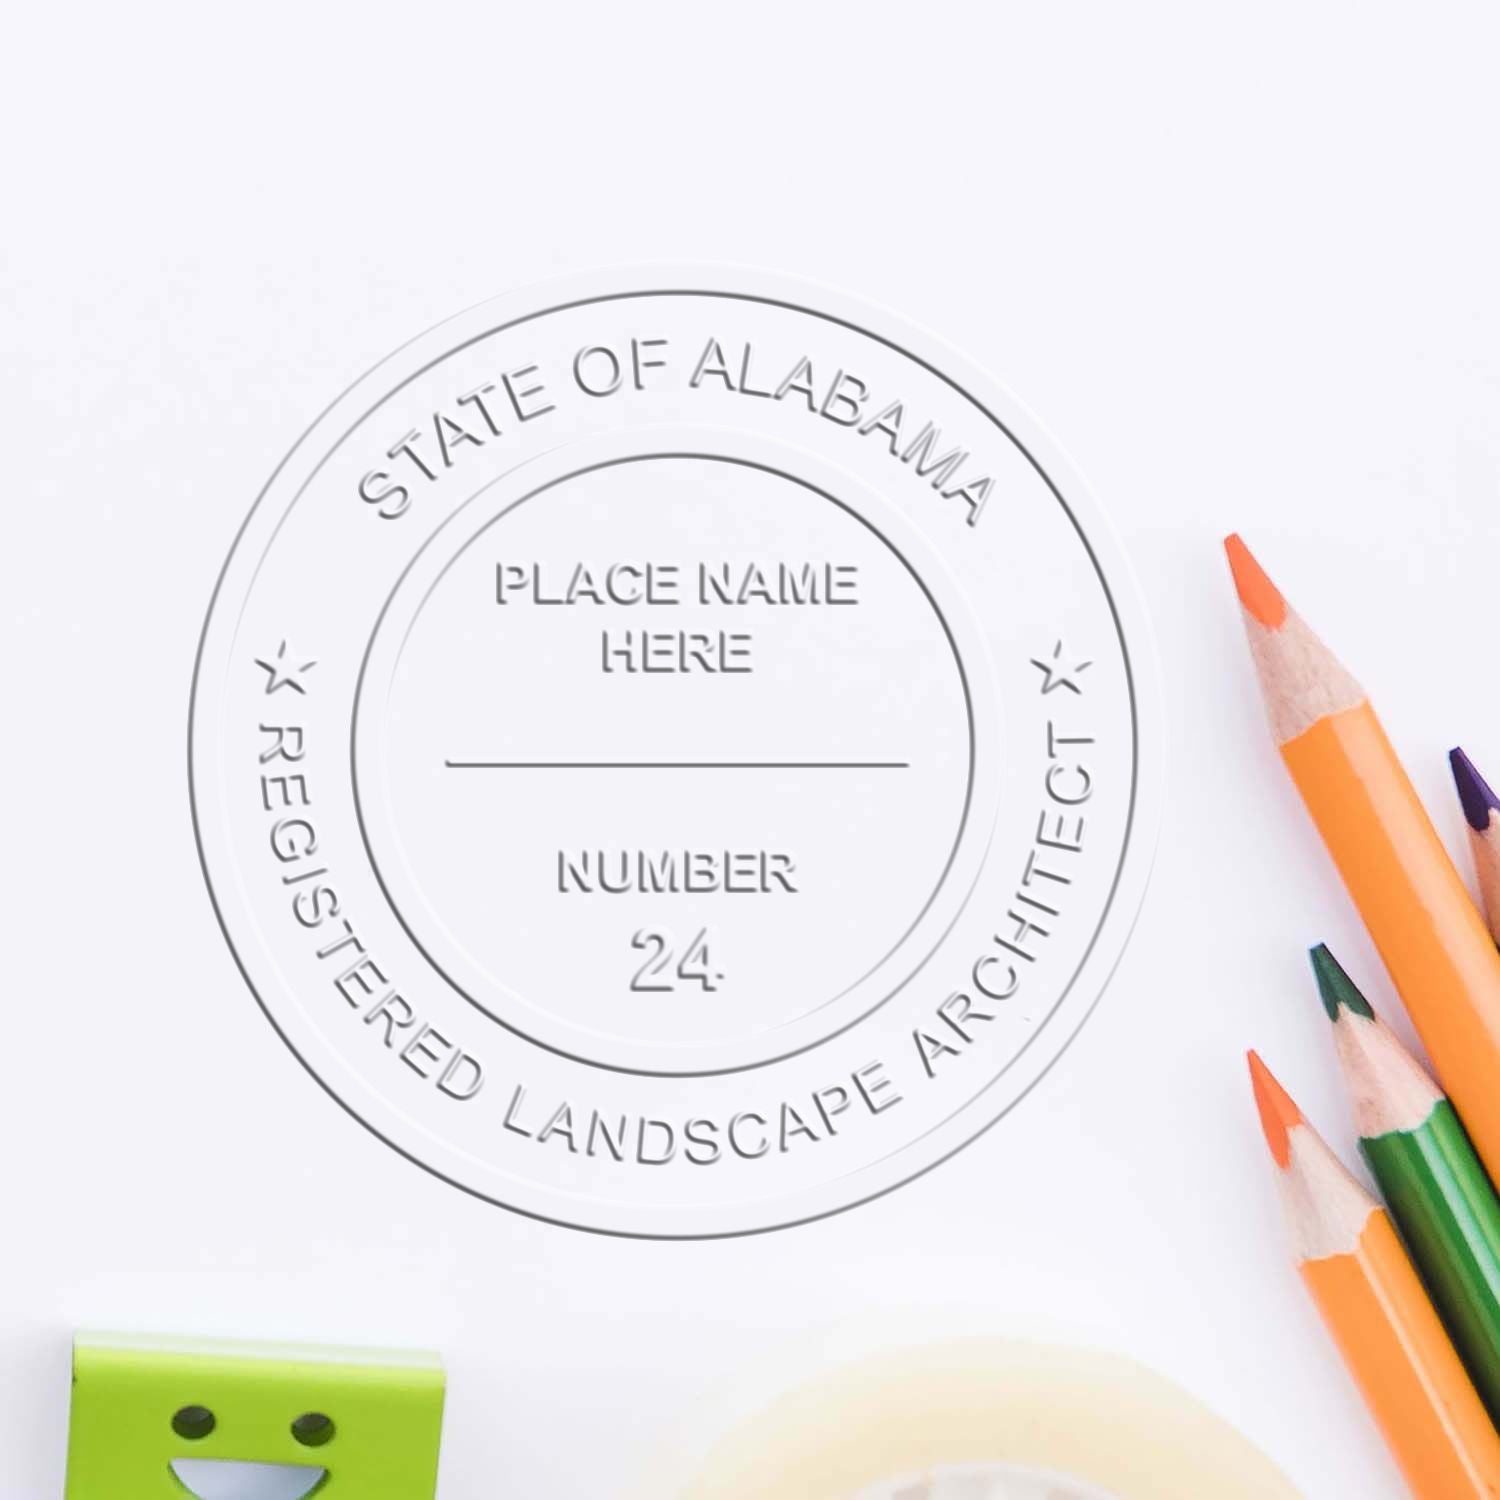 A stamped impression of the Alabama Desk Landscape Architectural Seal Embosser in this stylish lifestyle photo, setting the tone for a unique and personalized product.